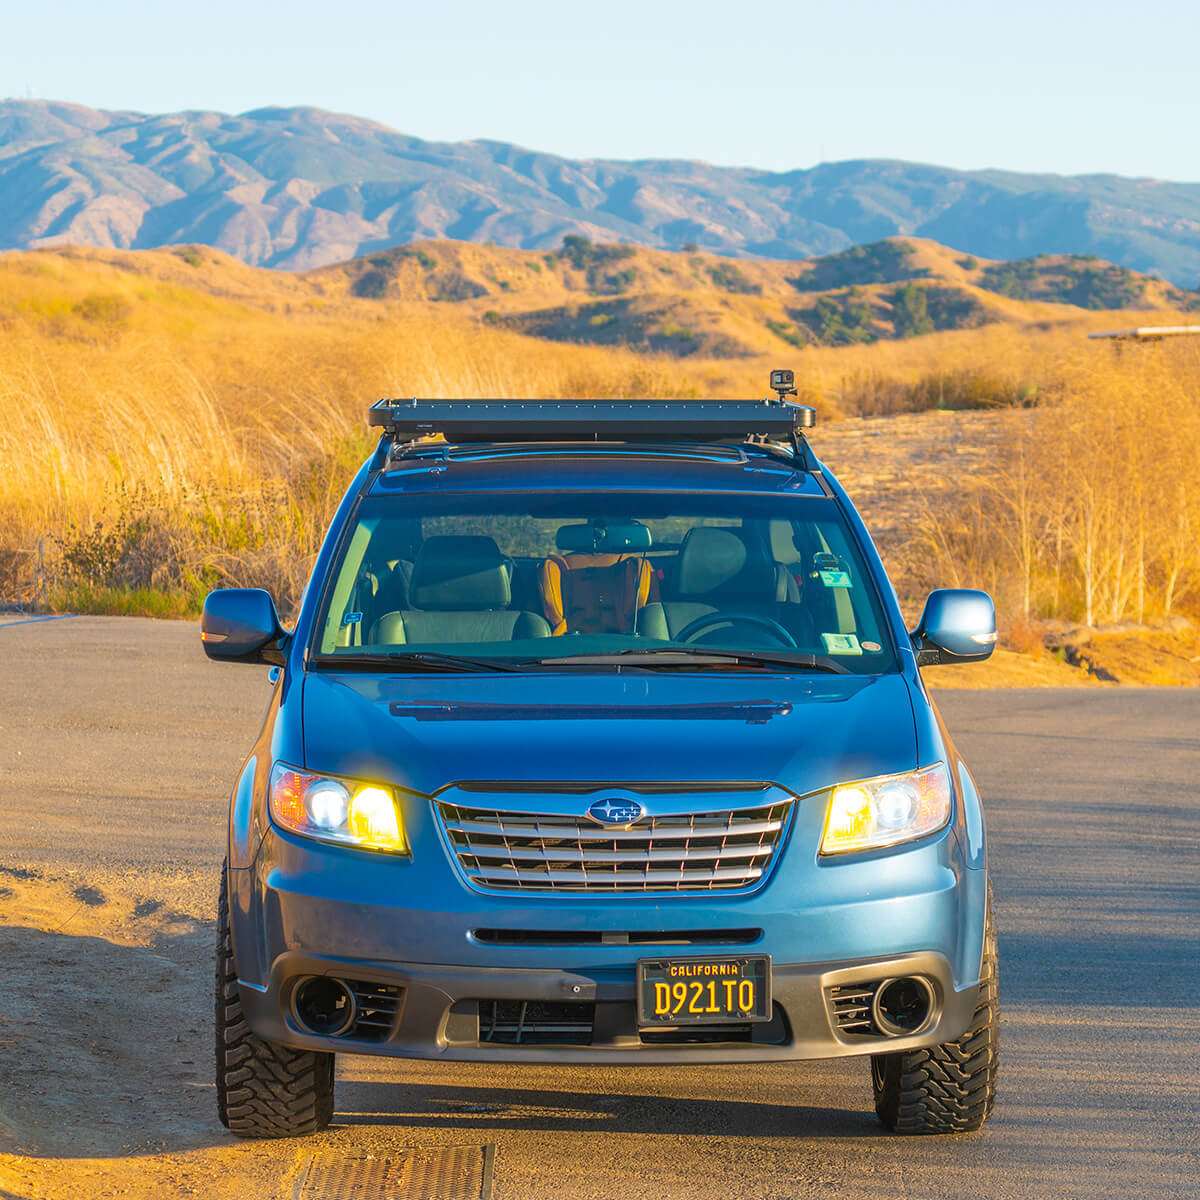 The Big Subie - a Lifted Subaru Tribeca with an Off-road Attitude